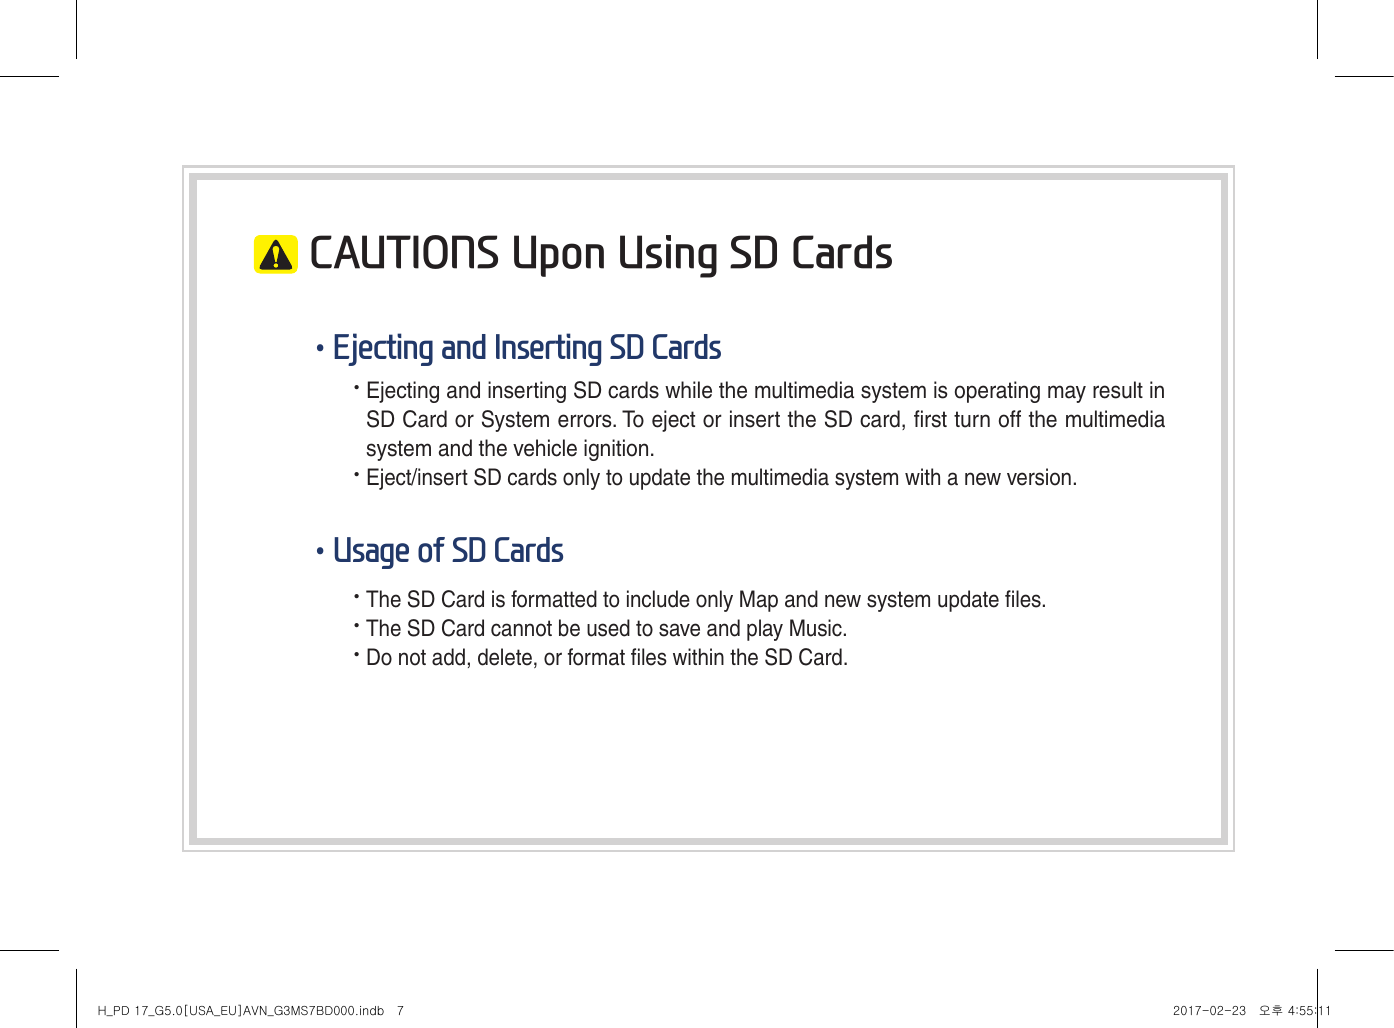  CAUTIONS Upon Using SD Cards•Ejecting and Inserting SD Cards• Ejecting and inserting SD cards while the multimedia system is operating may result in SD Card or System errors. To eject or insert the SD card, first turn off the multimedia system and the vehicle ignition.• Eject/insert SD cards only to update the multimedia system with a new version.•Usage of SD Cards• The SD Card is formatted to include only Map and new system update files.• The SD Card cannot be used to save and play Music.• Do not add, delete, or format files within the SD Card.H_PD 17_G5.0[USA_EU]AVN_G3MS7BD000.indb   7 2017-02-23   오후 4:55:11